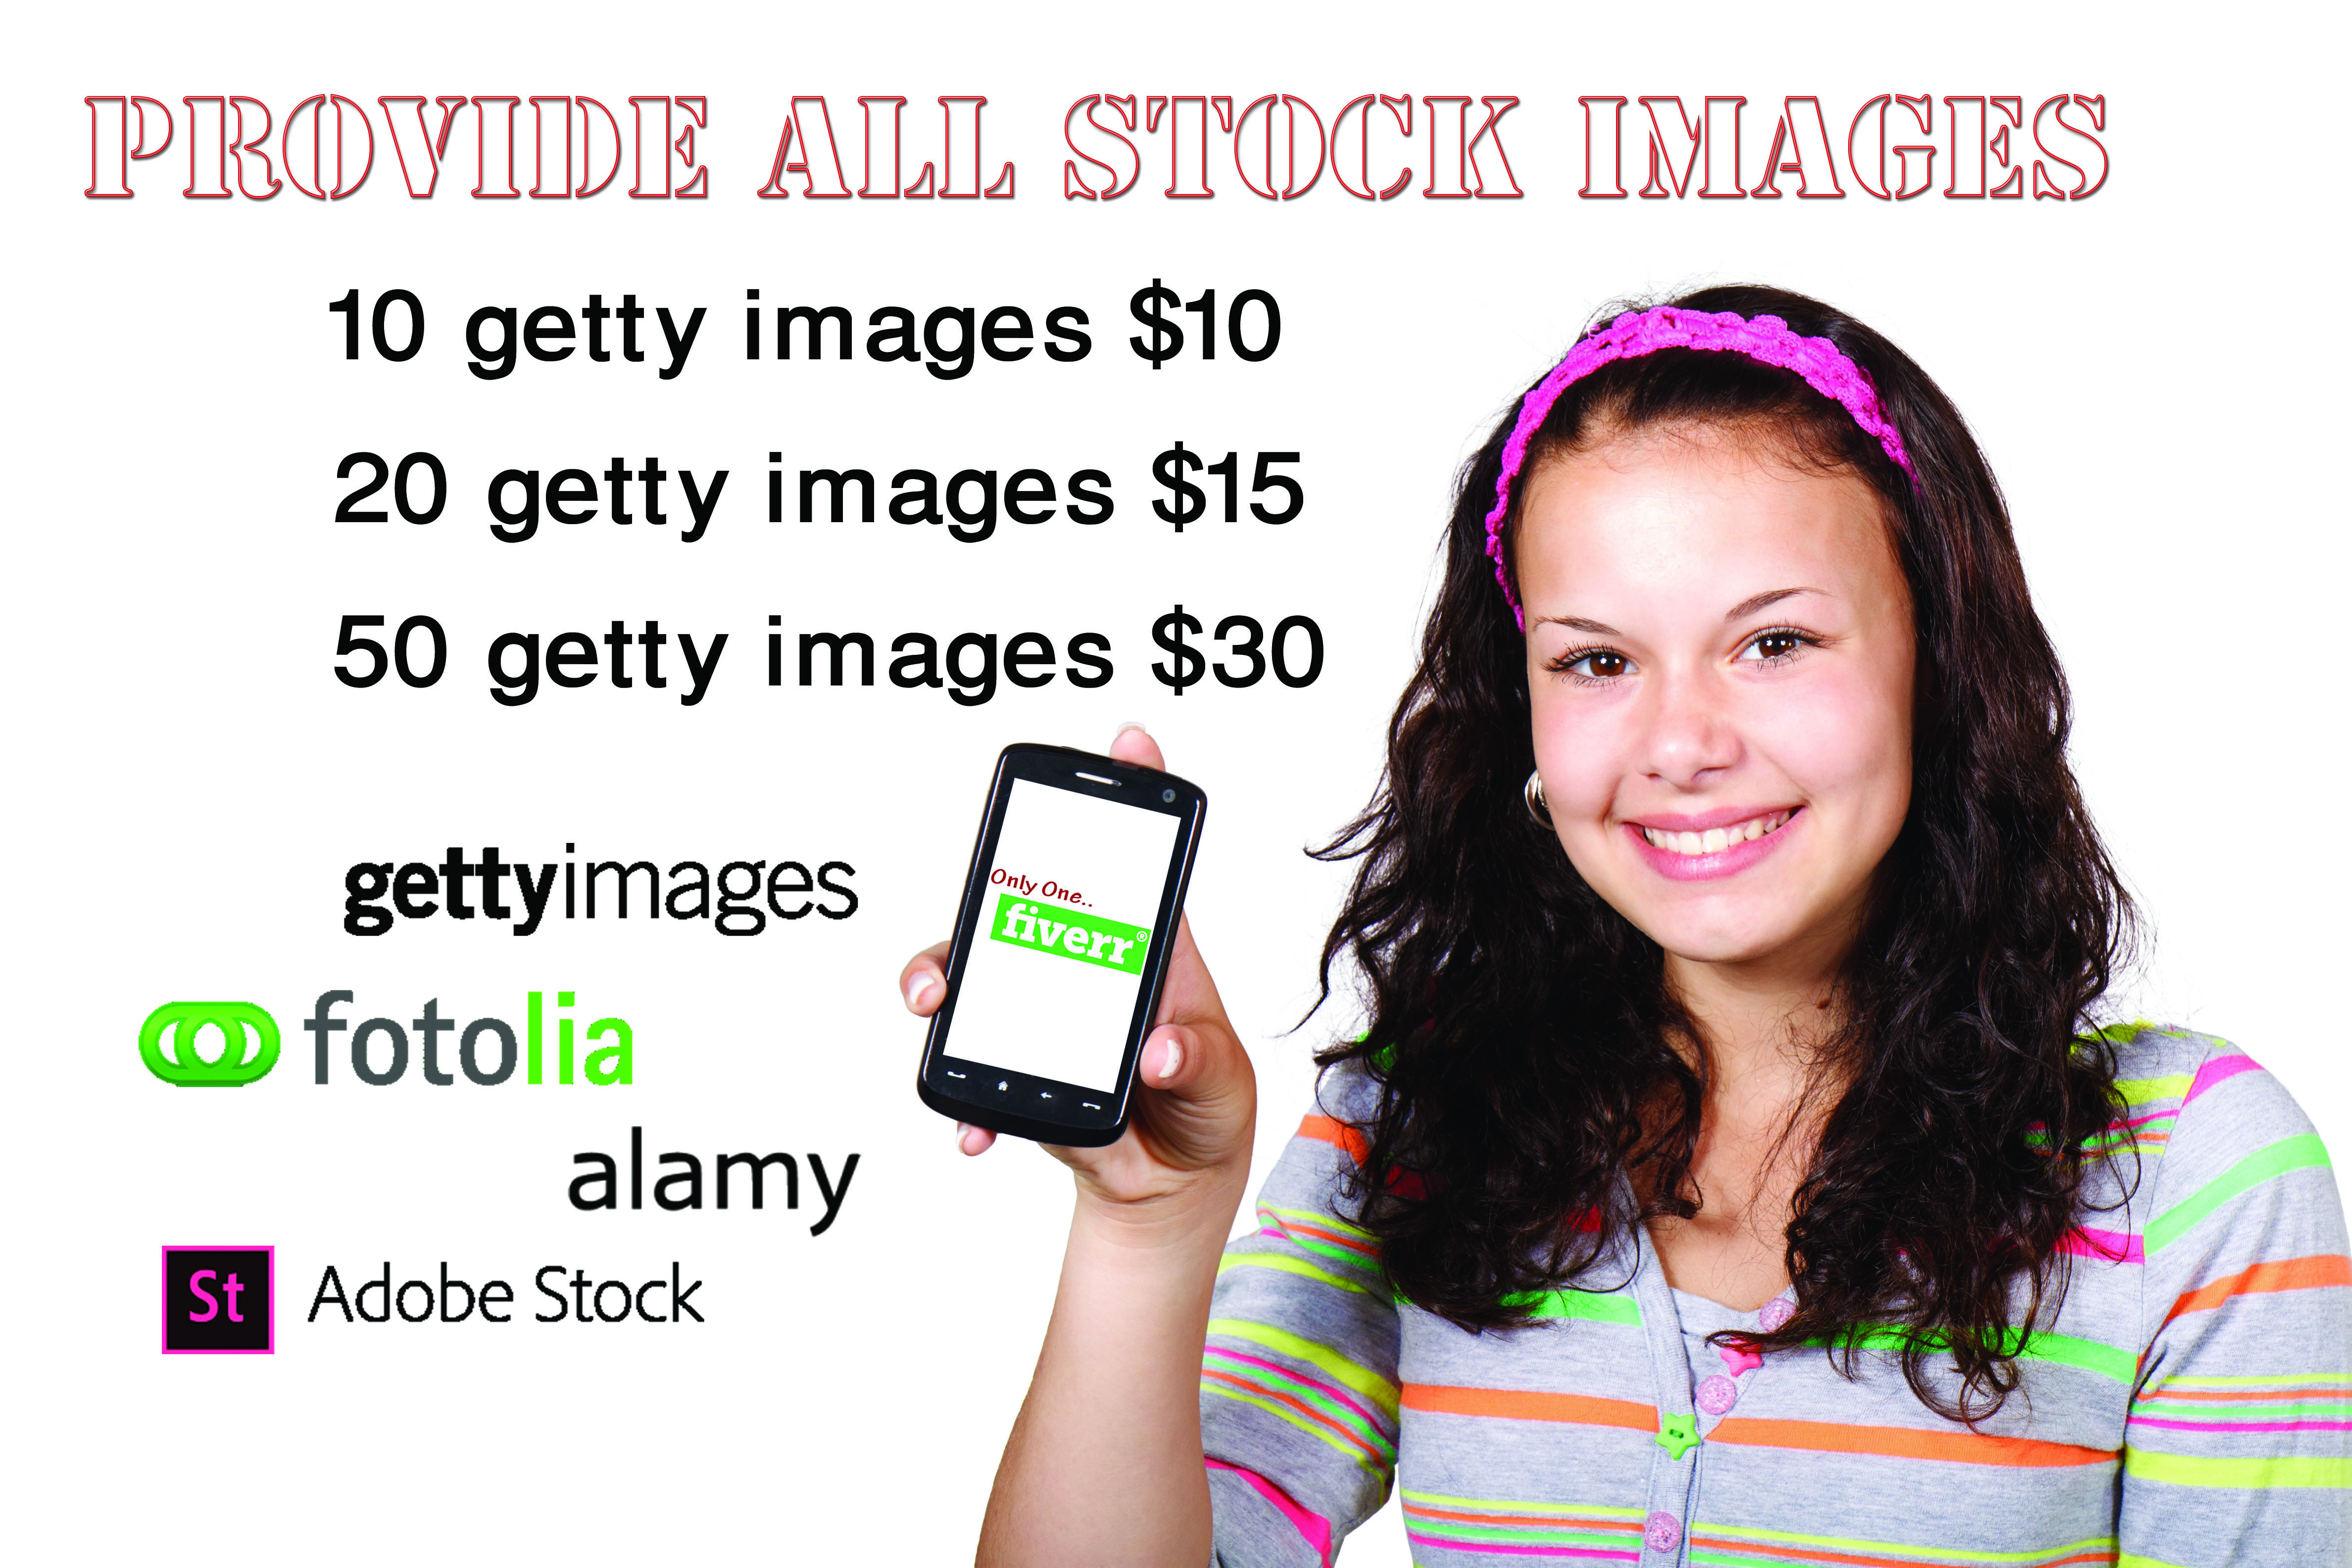 7069i will give you royalty free stock photos, getty images